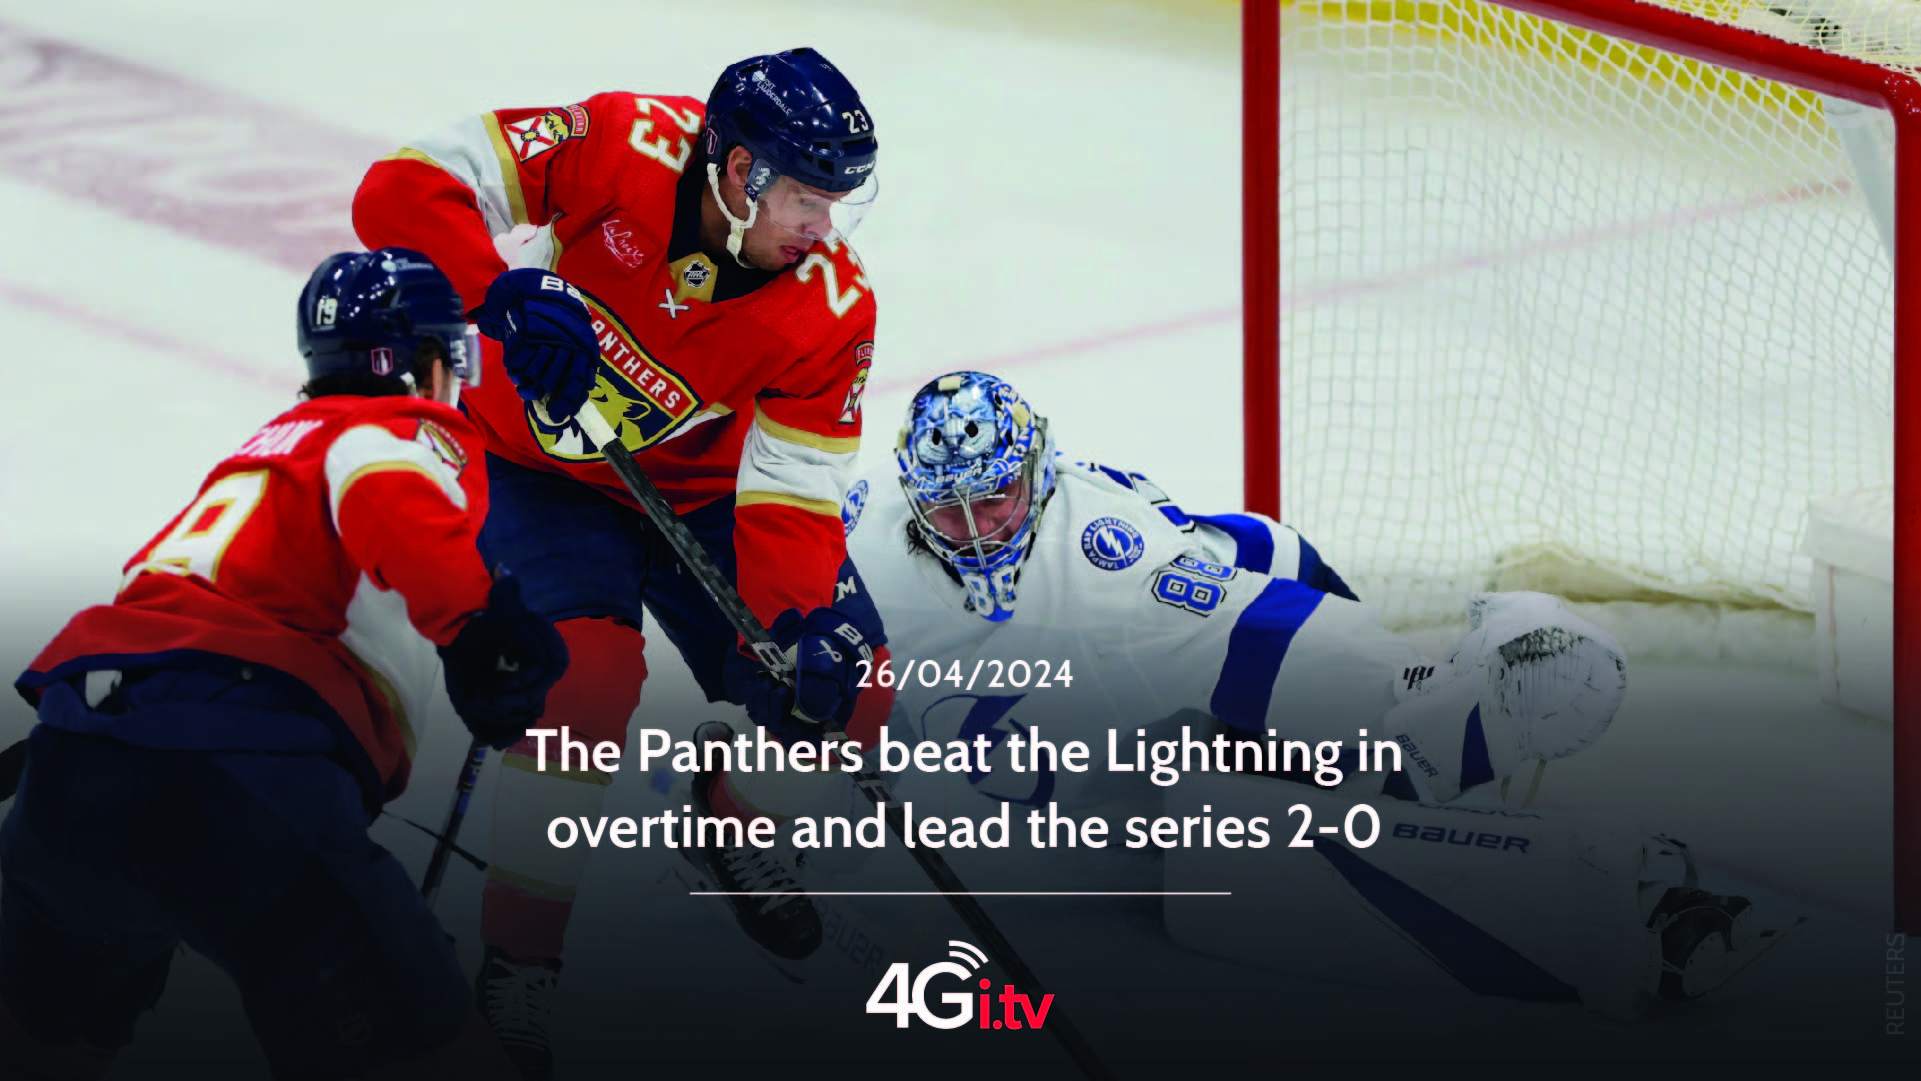 Подробнее о статье The Panthers beat the Lightning in overtime and lead the series 2-0 